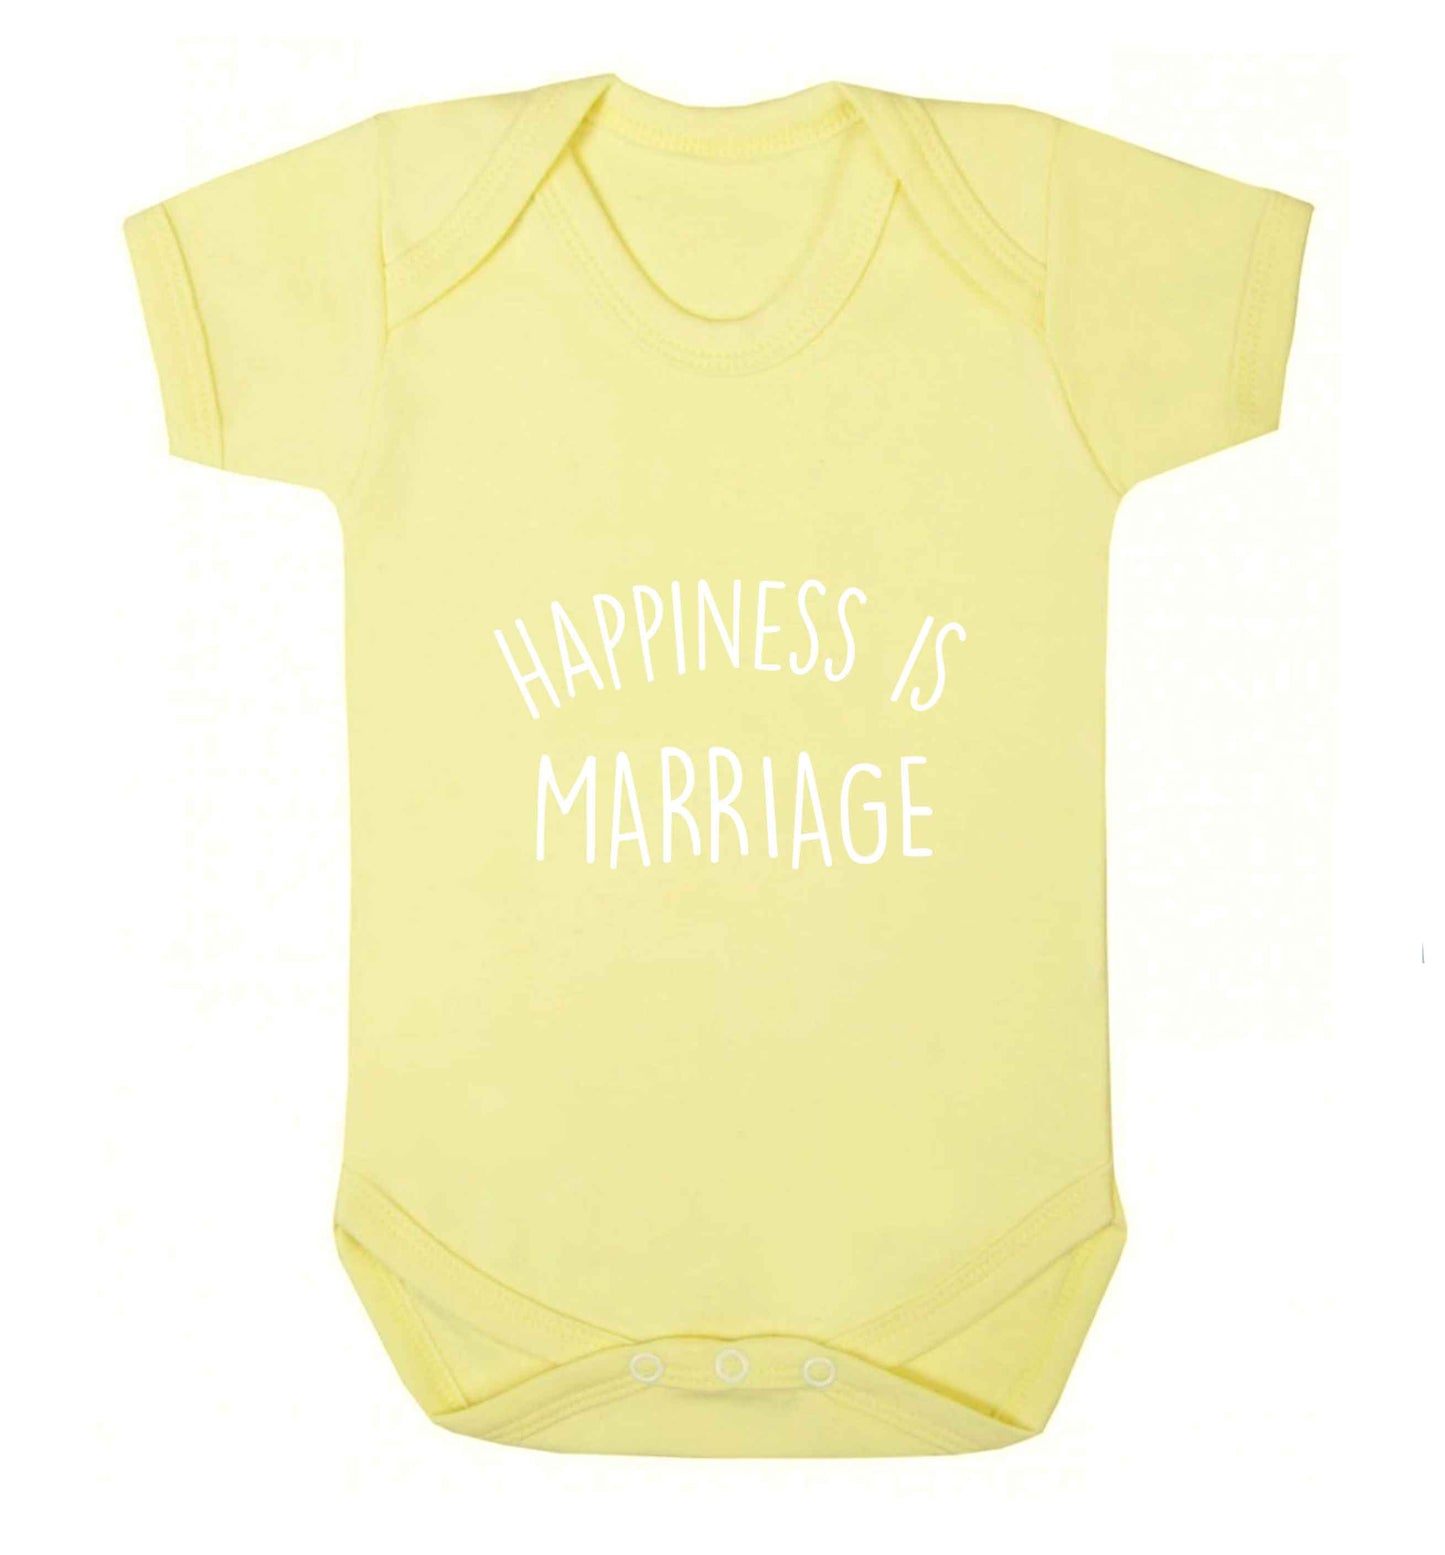 Happiness is marriage baby vest pale yellow 18-24 months